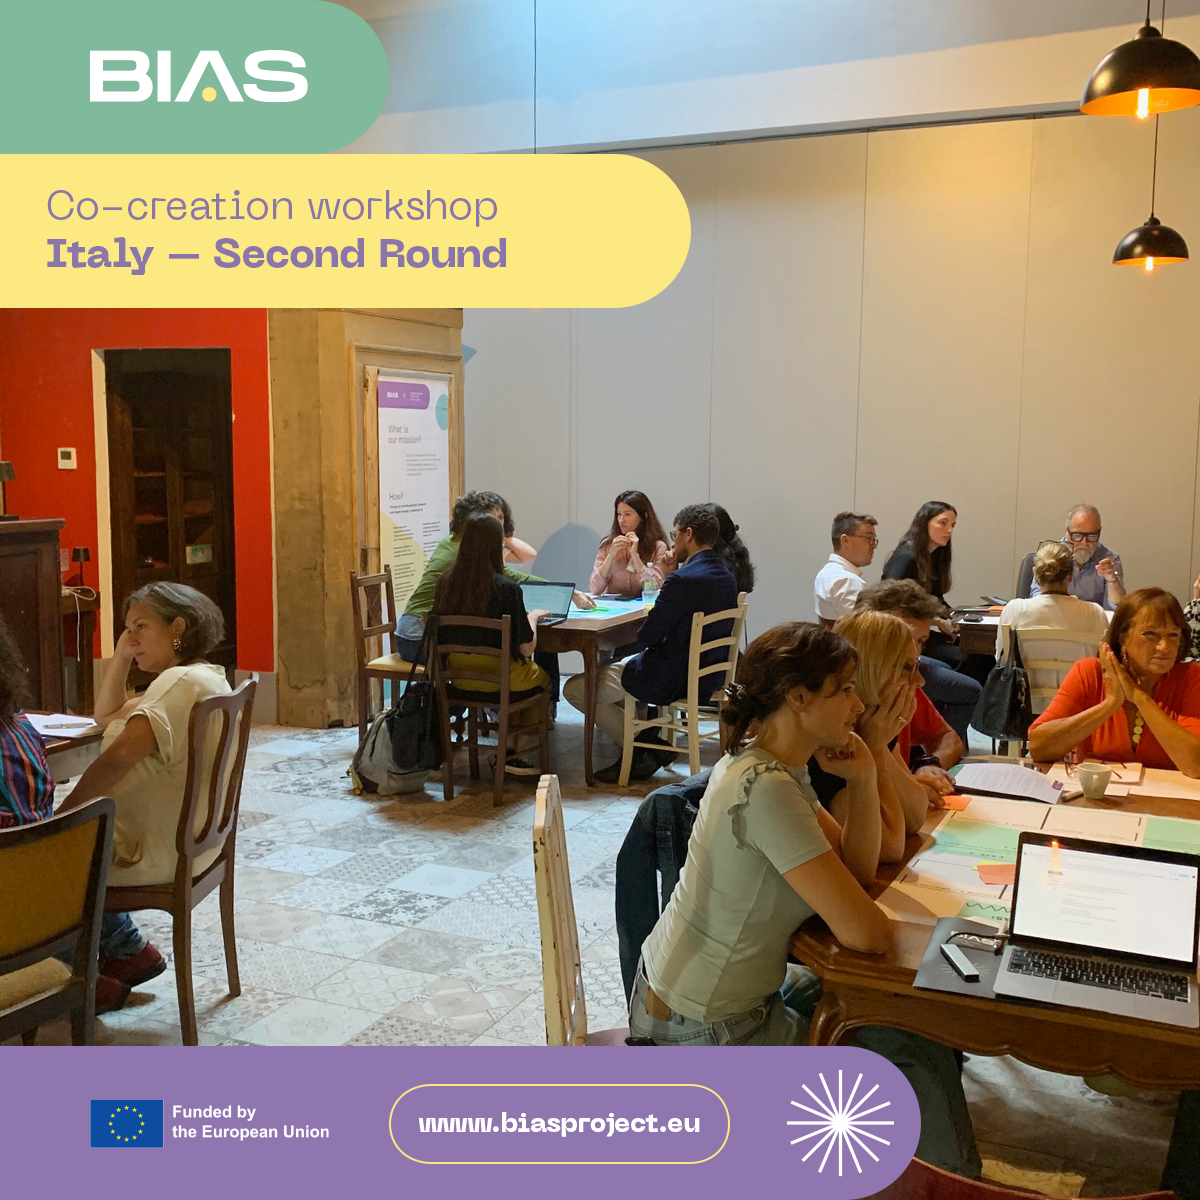 Co-creation Workshops in Italy